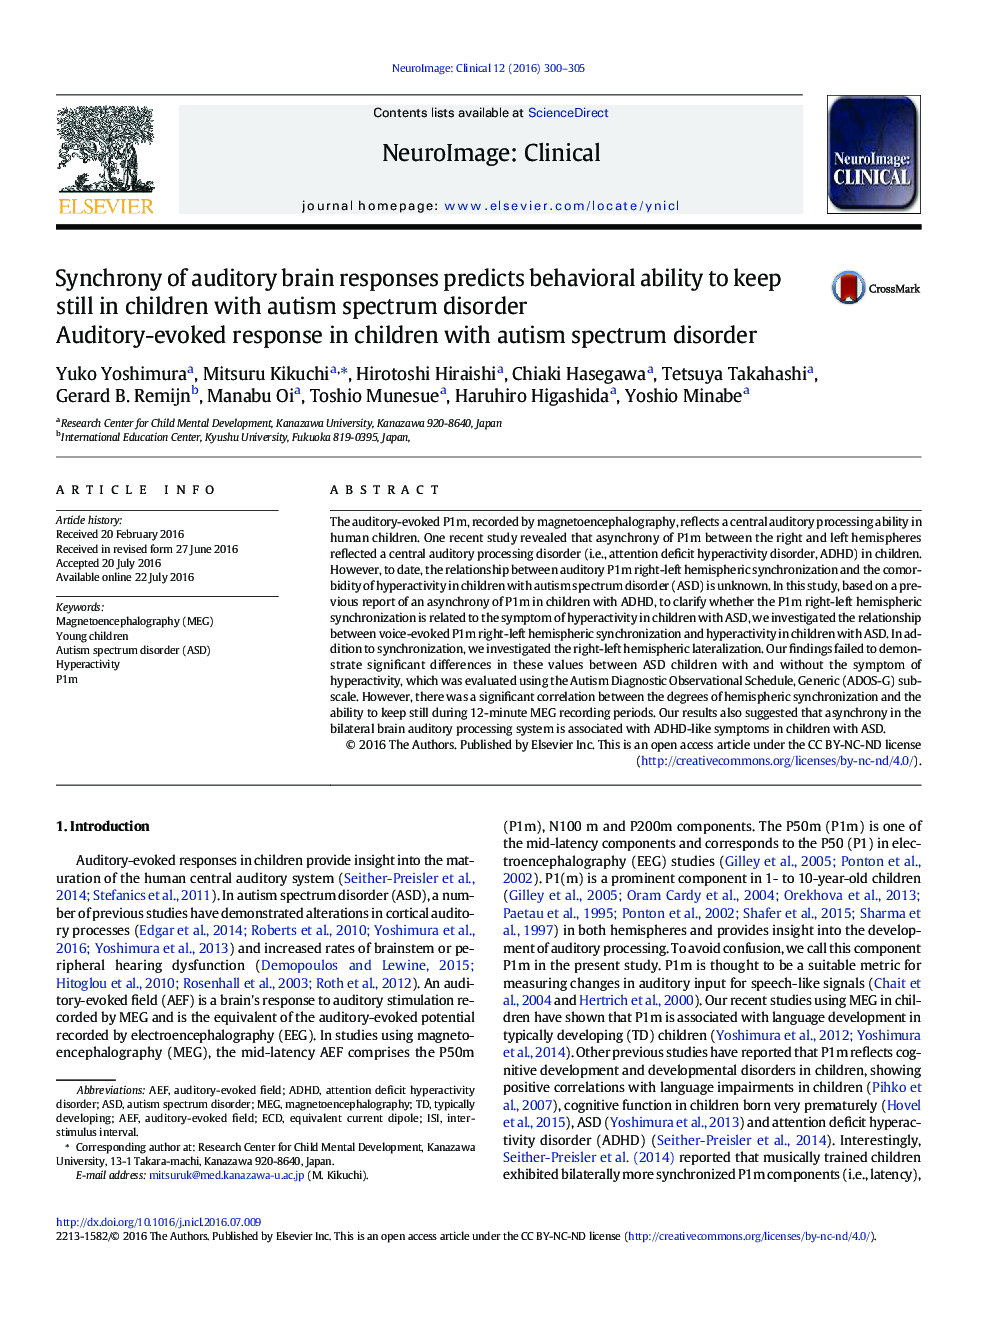 Synchrony of auditory brain responses predicts behavioral ability to keep still in children with autism spectrum disorder: Auditory-evoked response in children with autism spectrum disorder